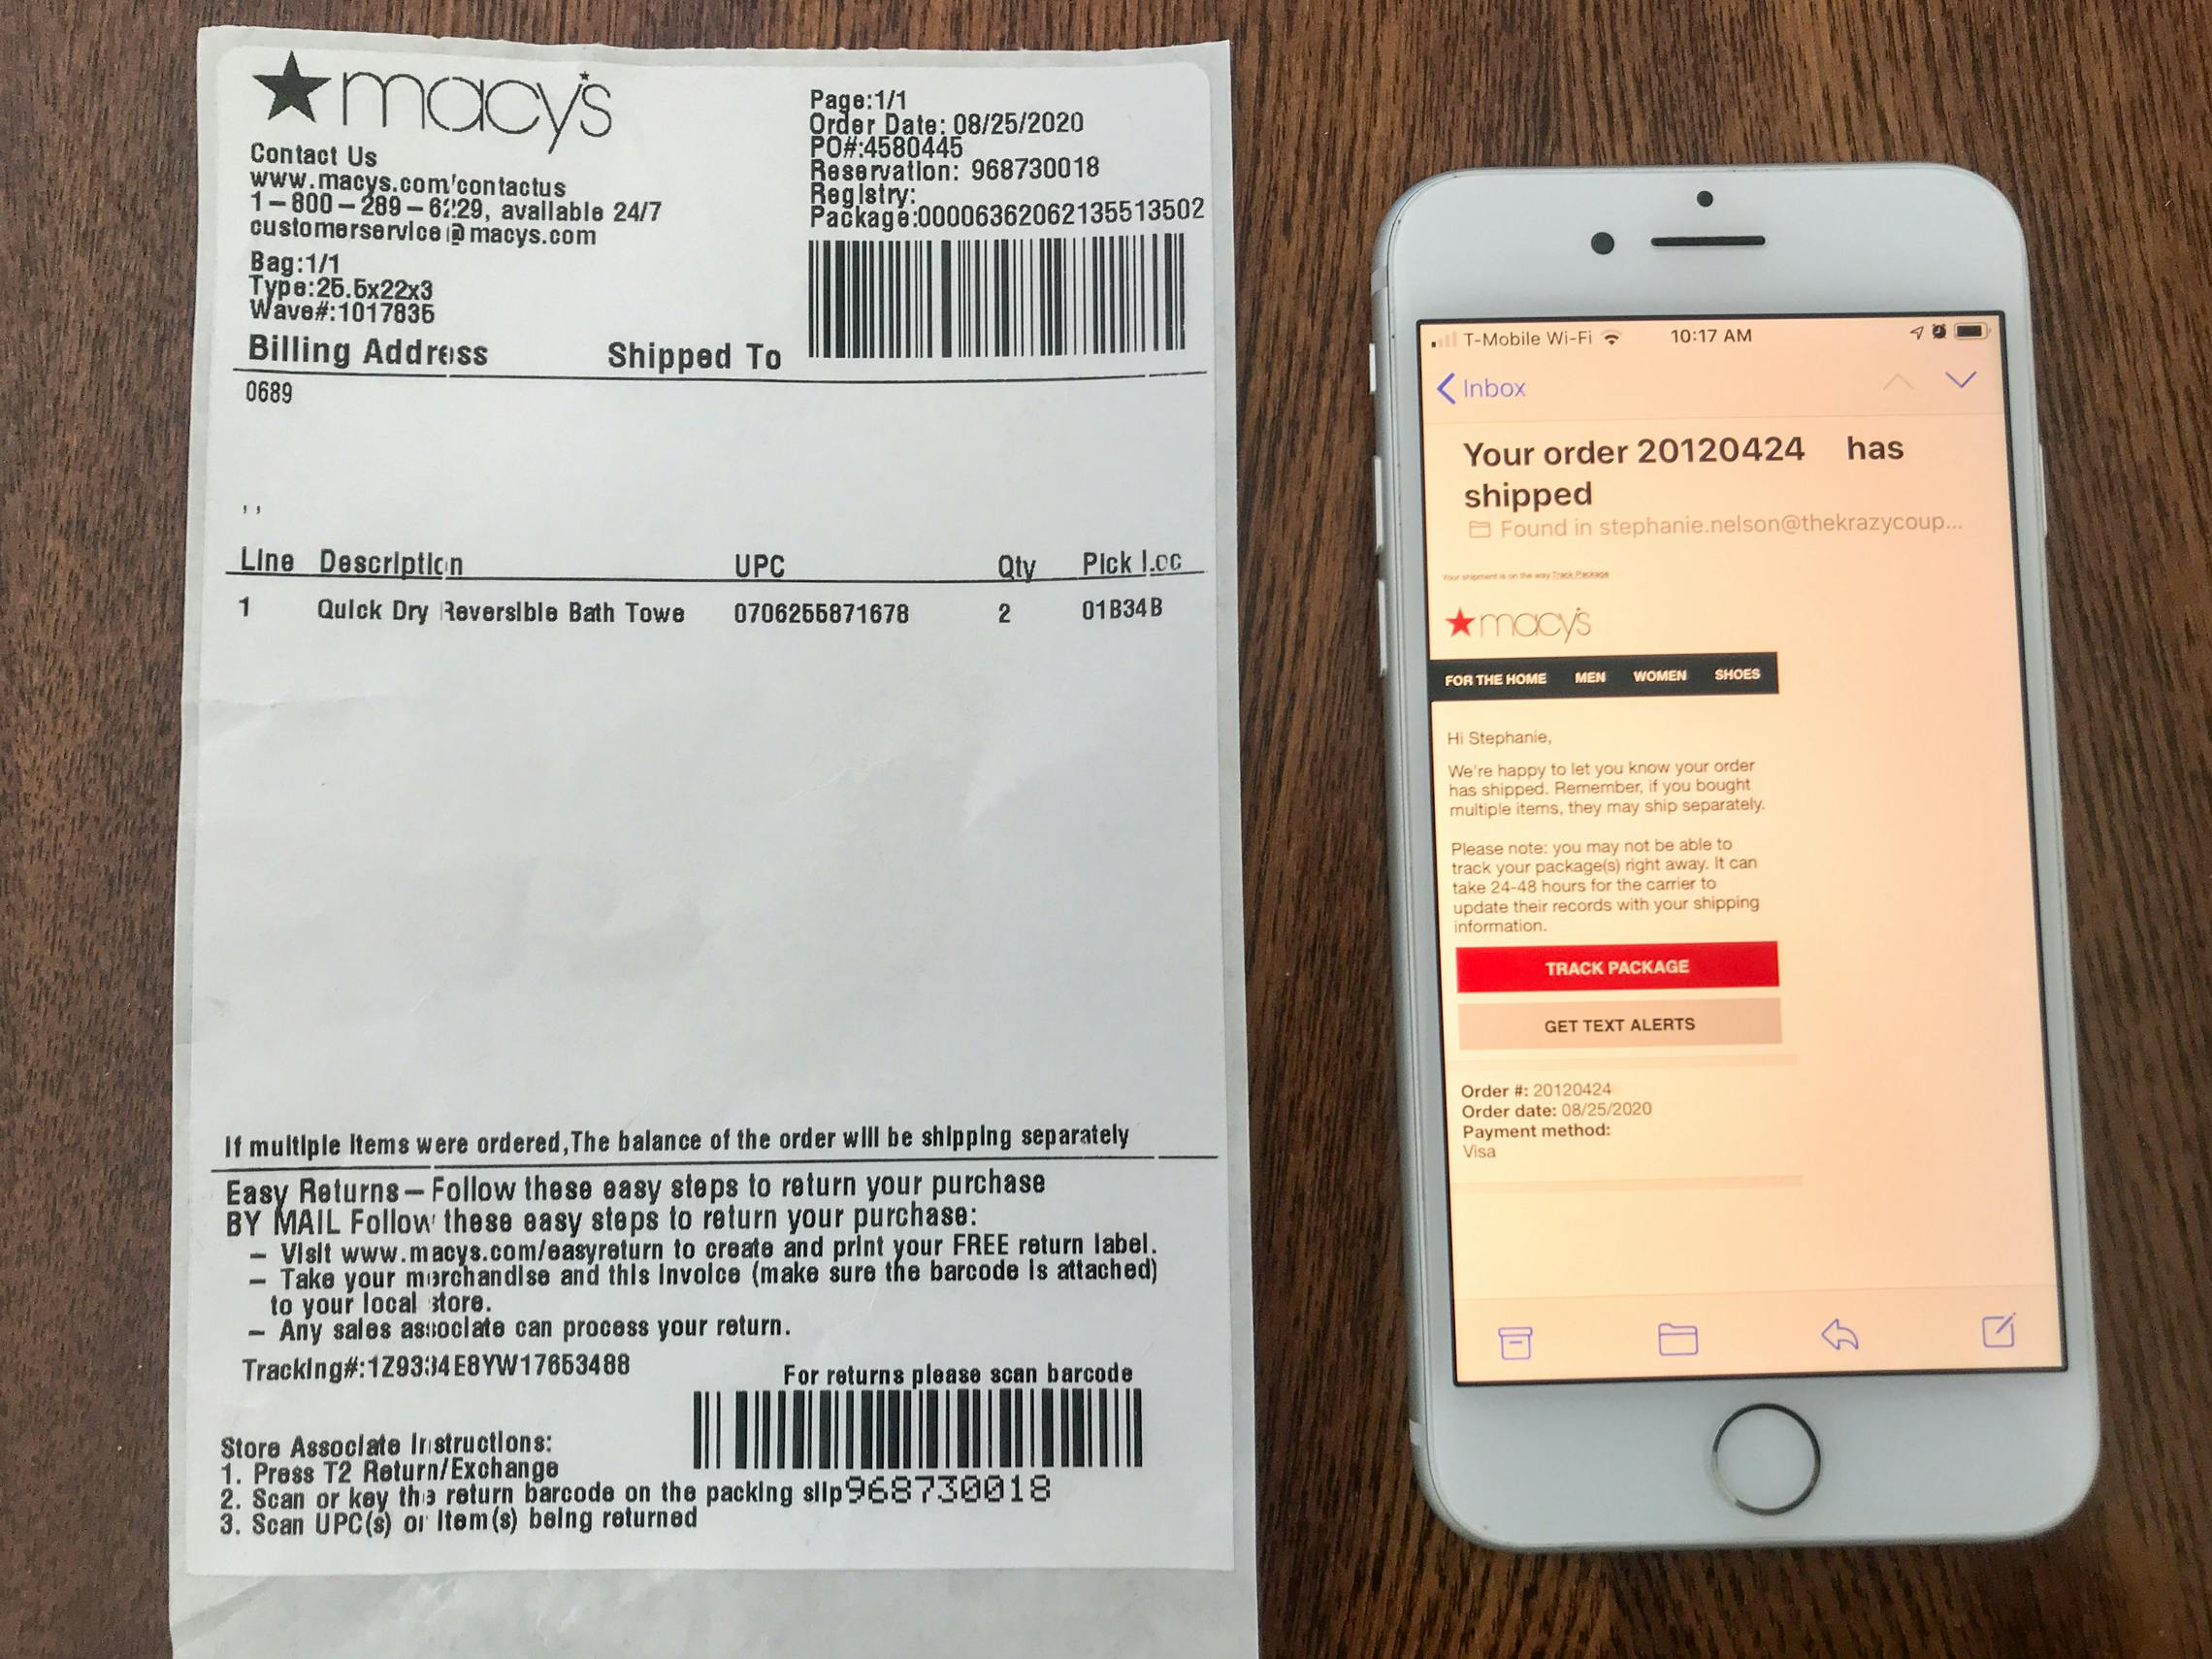 Macy's Return Policy Offers Free (and Honestly, Easy!) Returns - The Krazy Coupon Lady